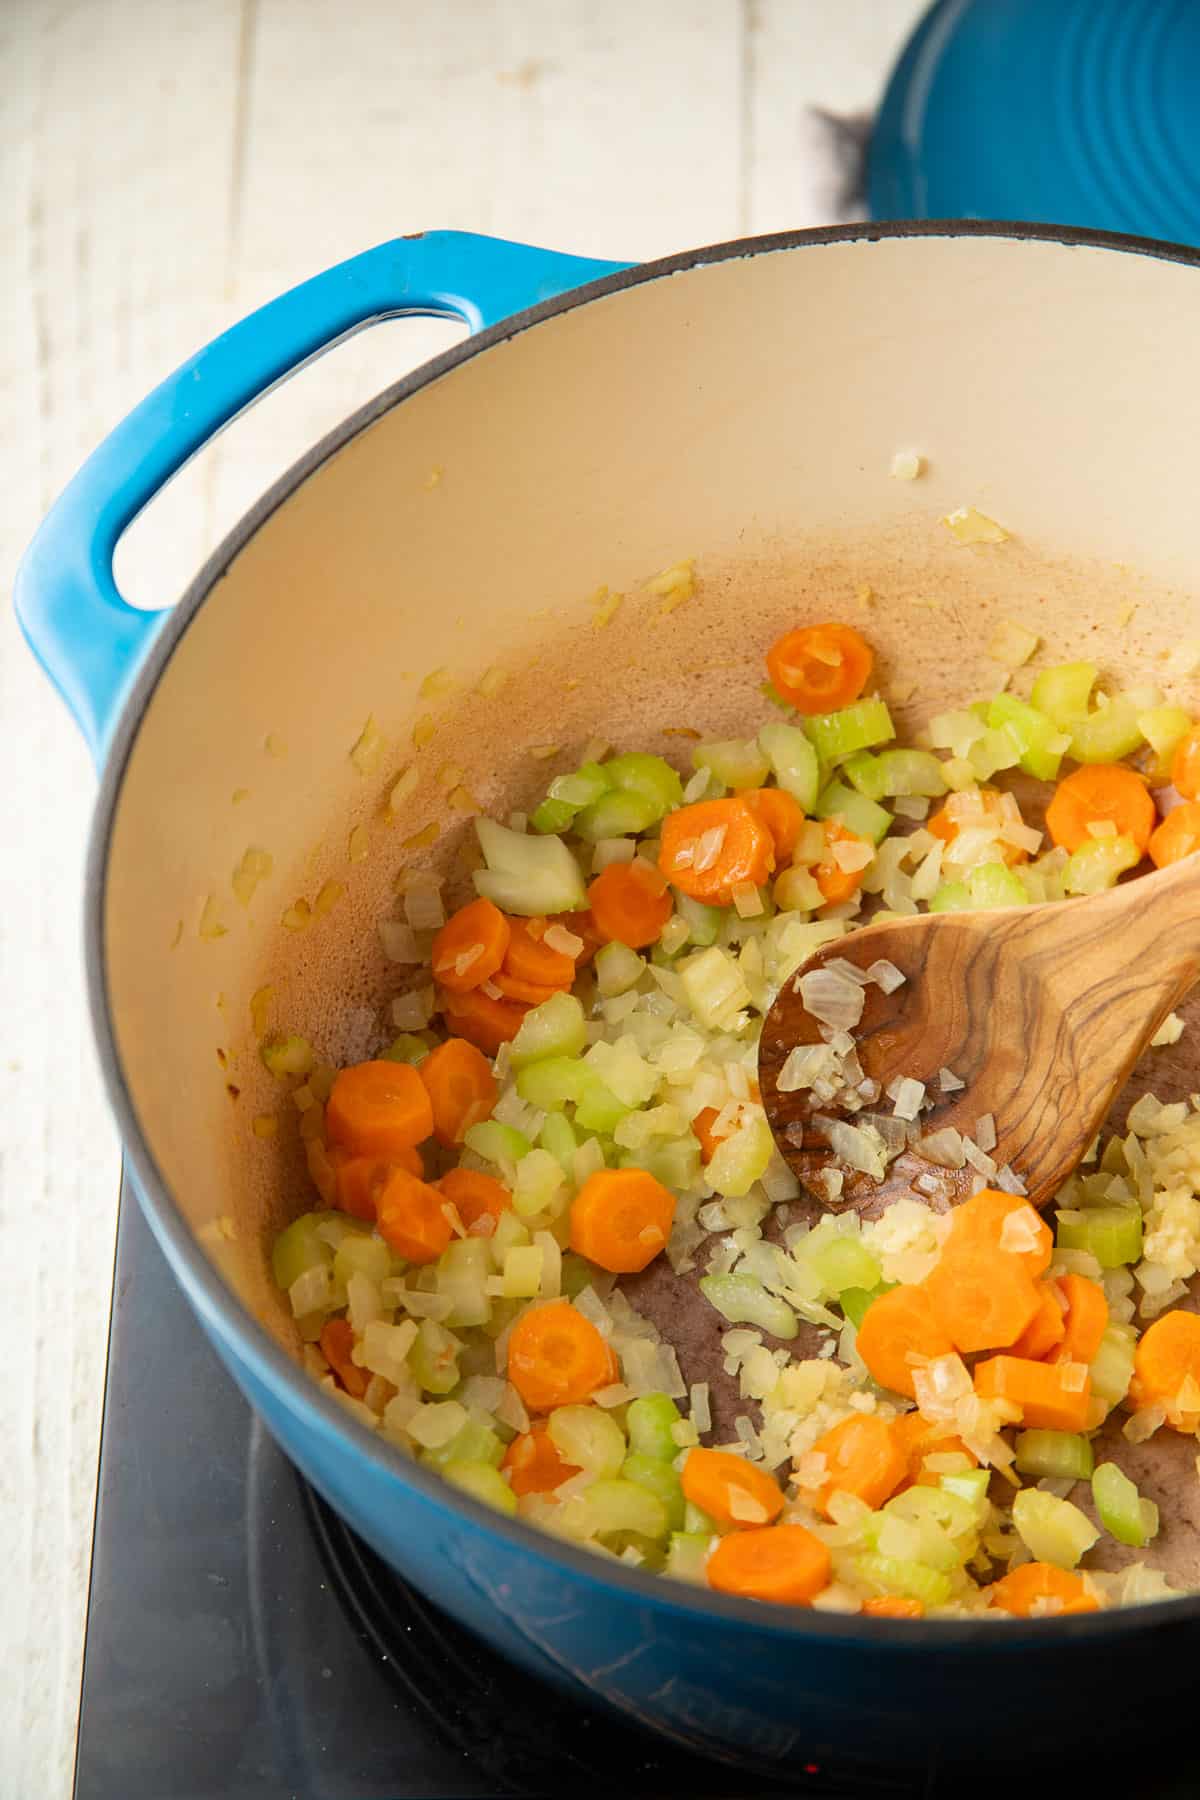 Carrots, celery, and diced onion cooking in a pot.